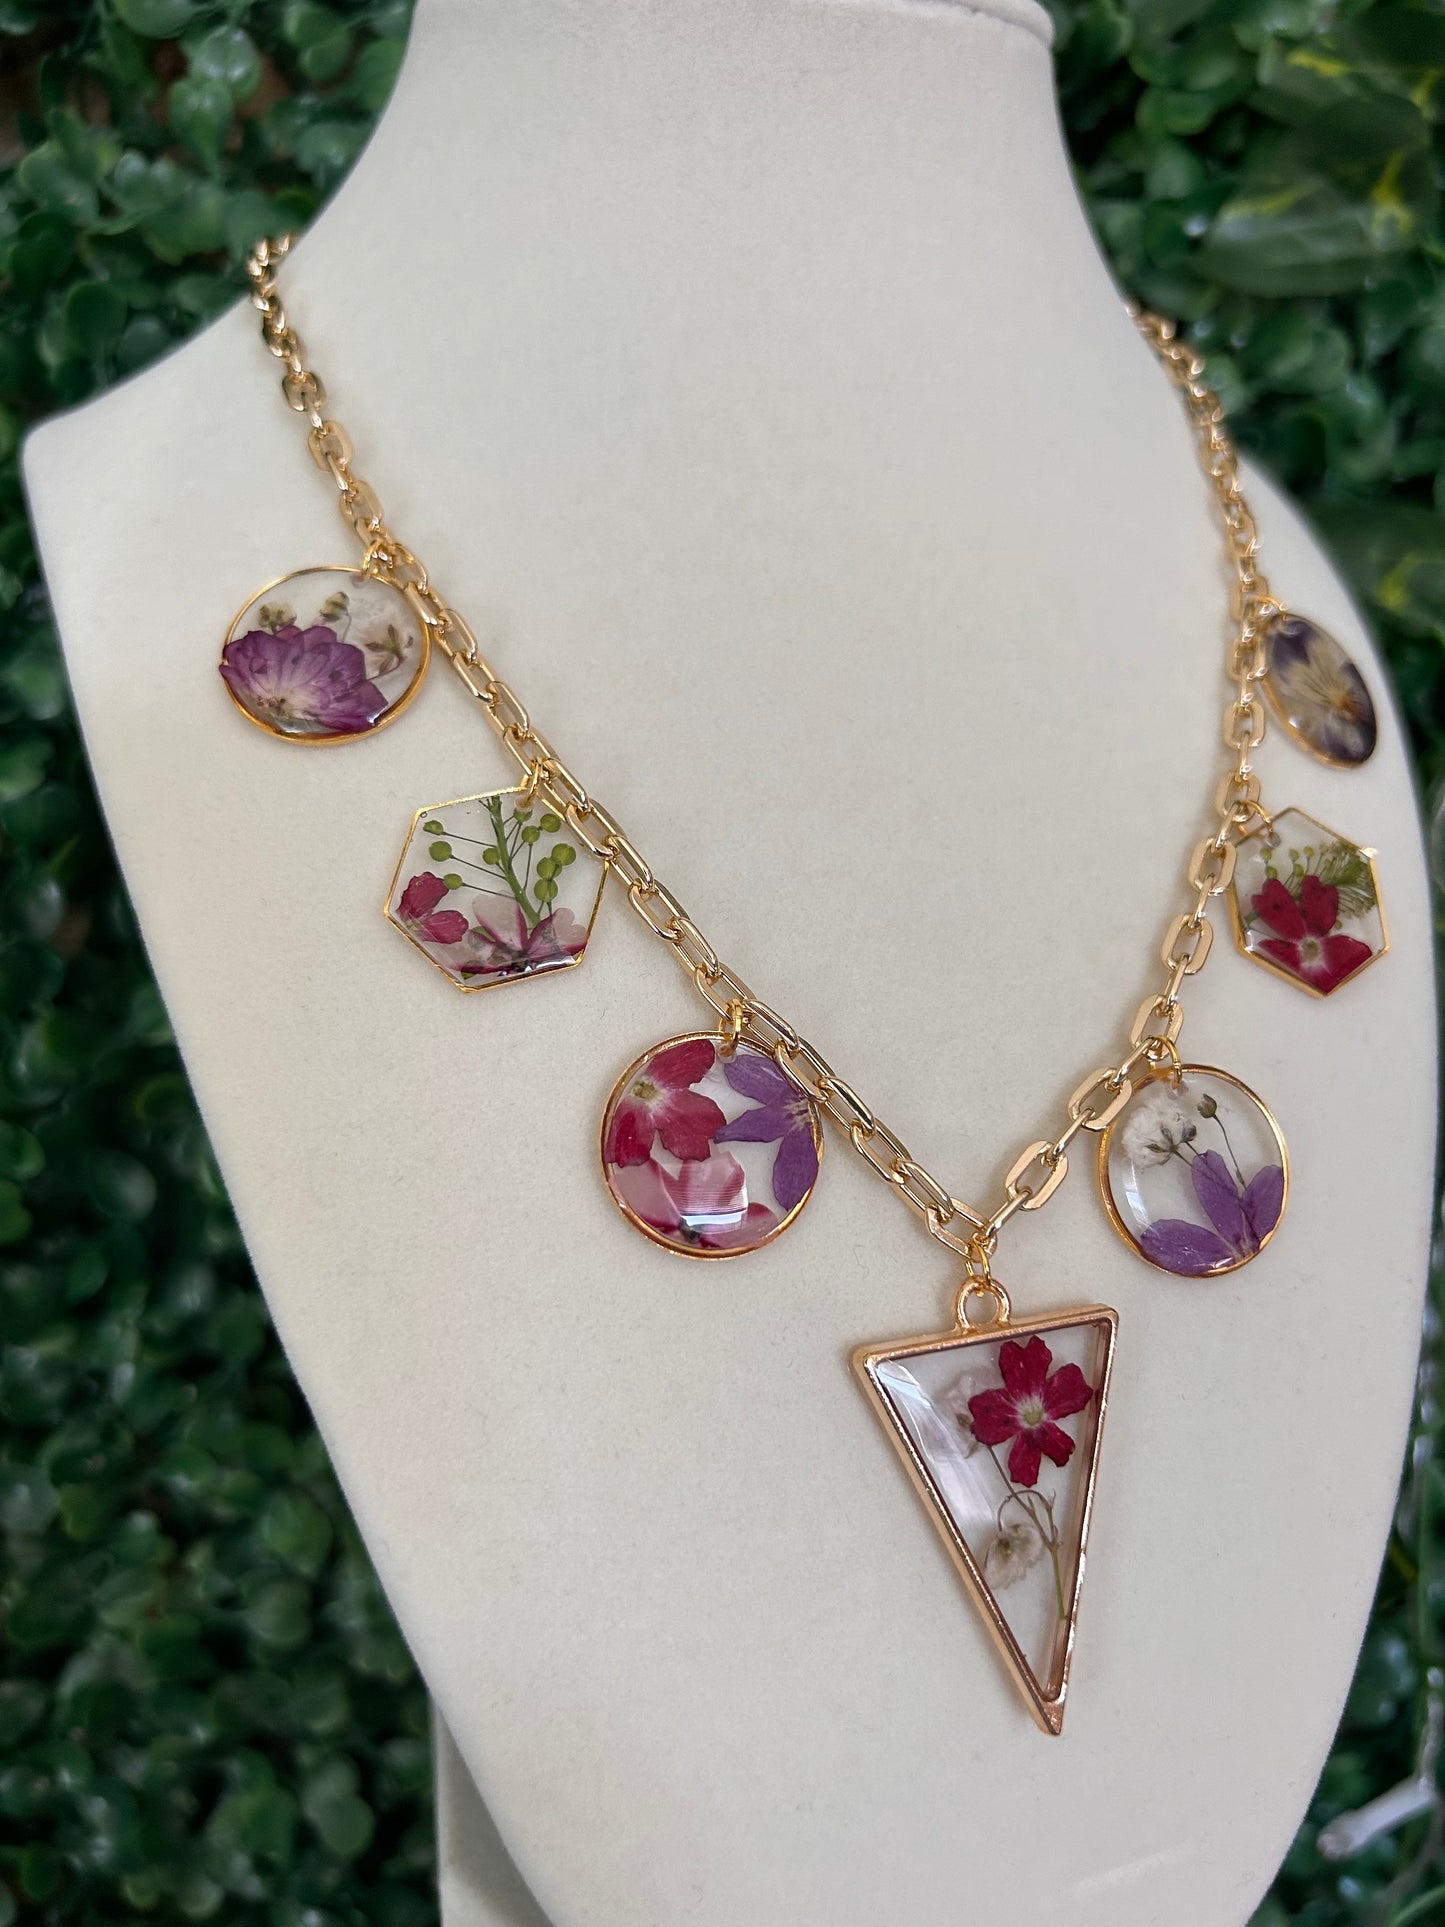 Pressed flower charm necklace (reds and purples)